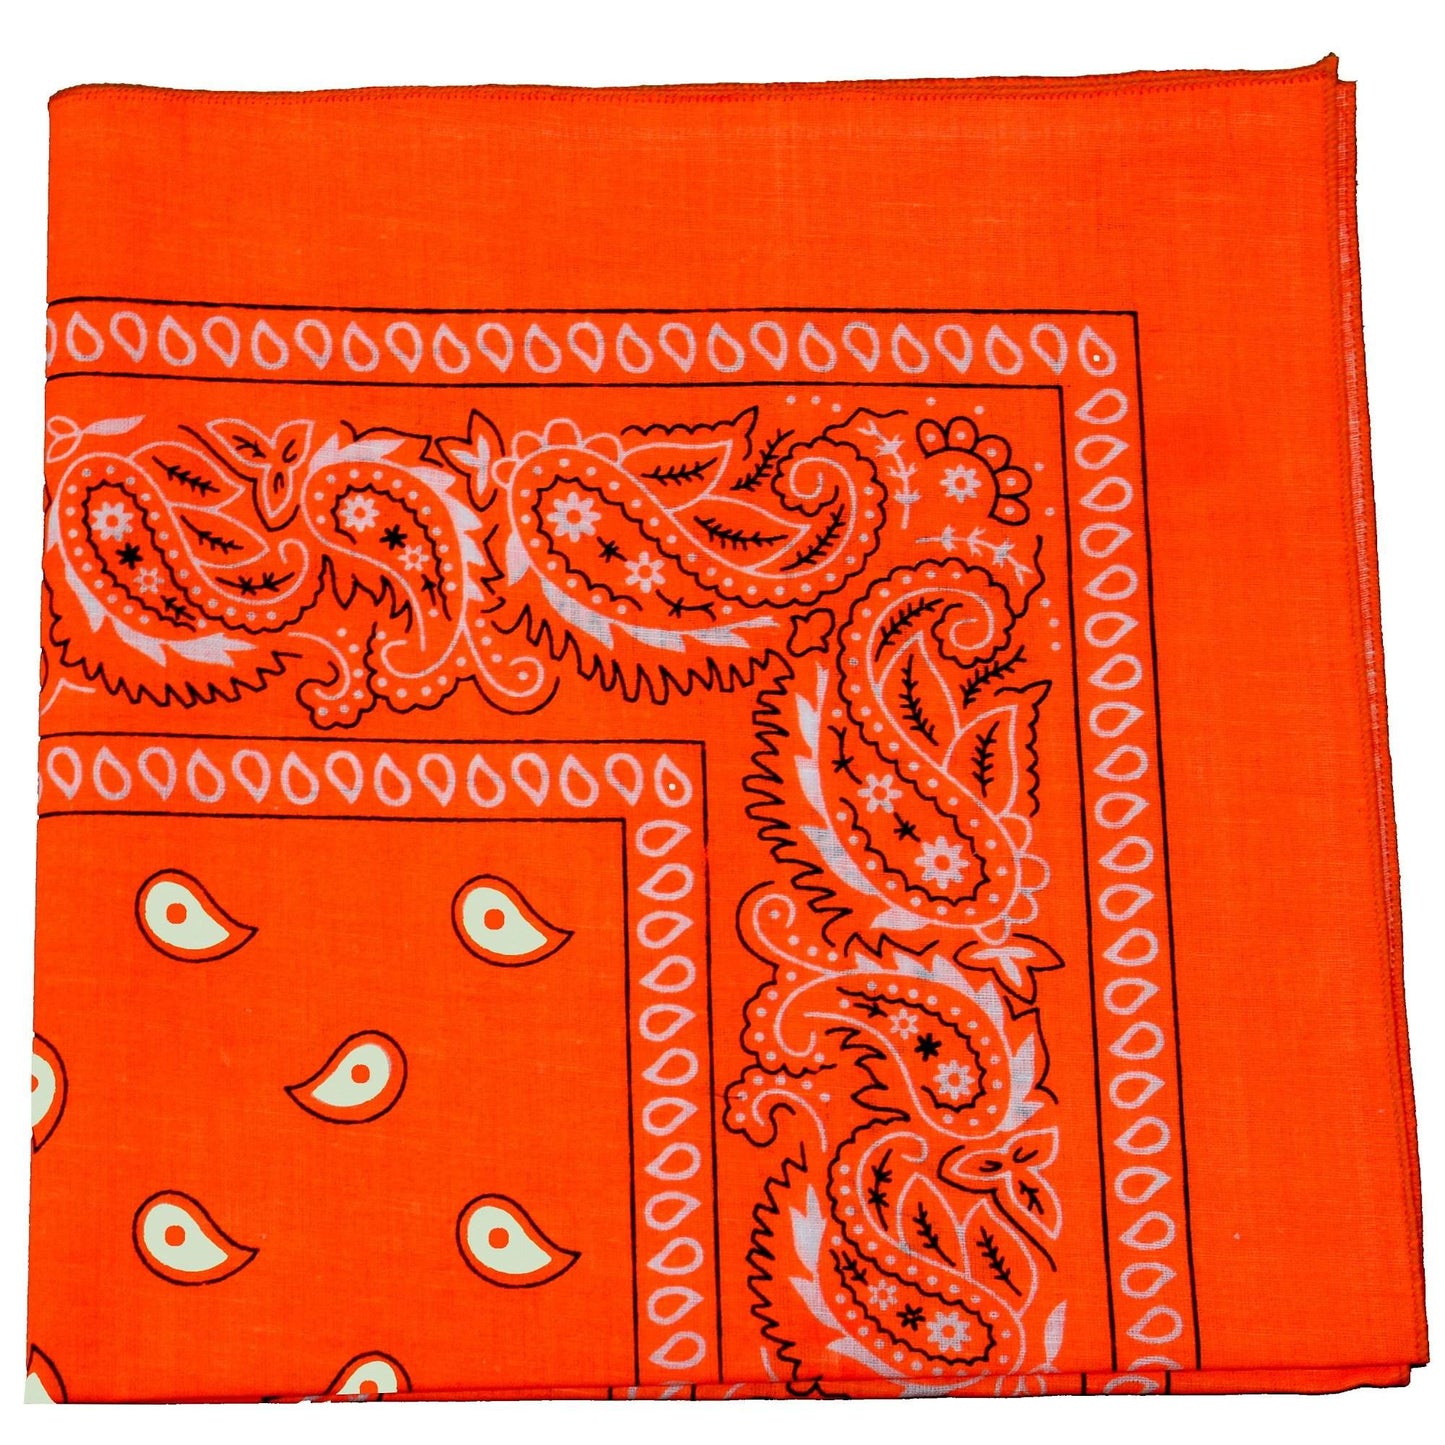 Mechaly Paisley 100% Cotton Double Sided Bandanas - 36 Pack